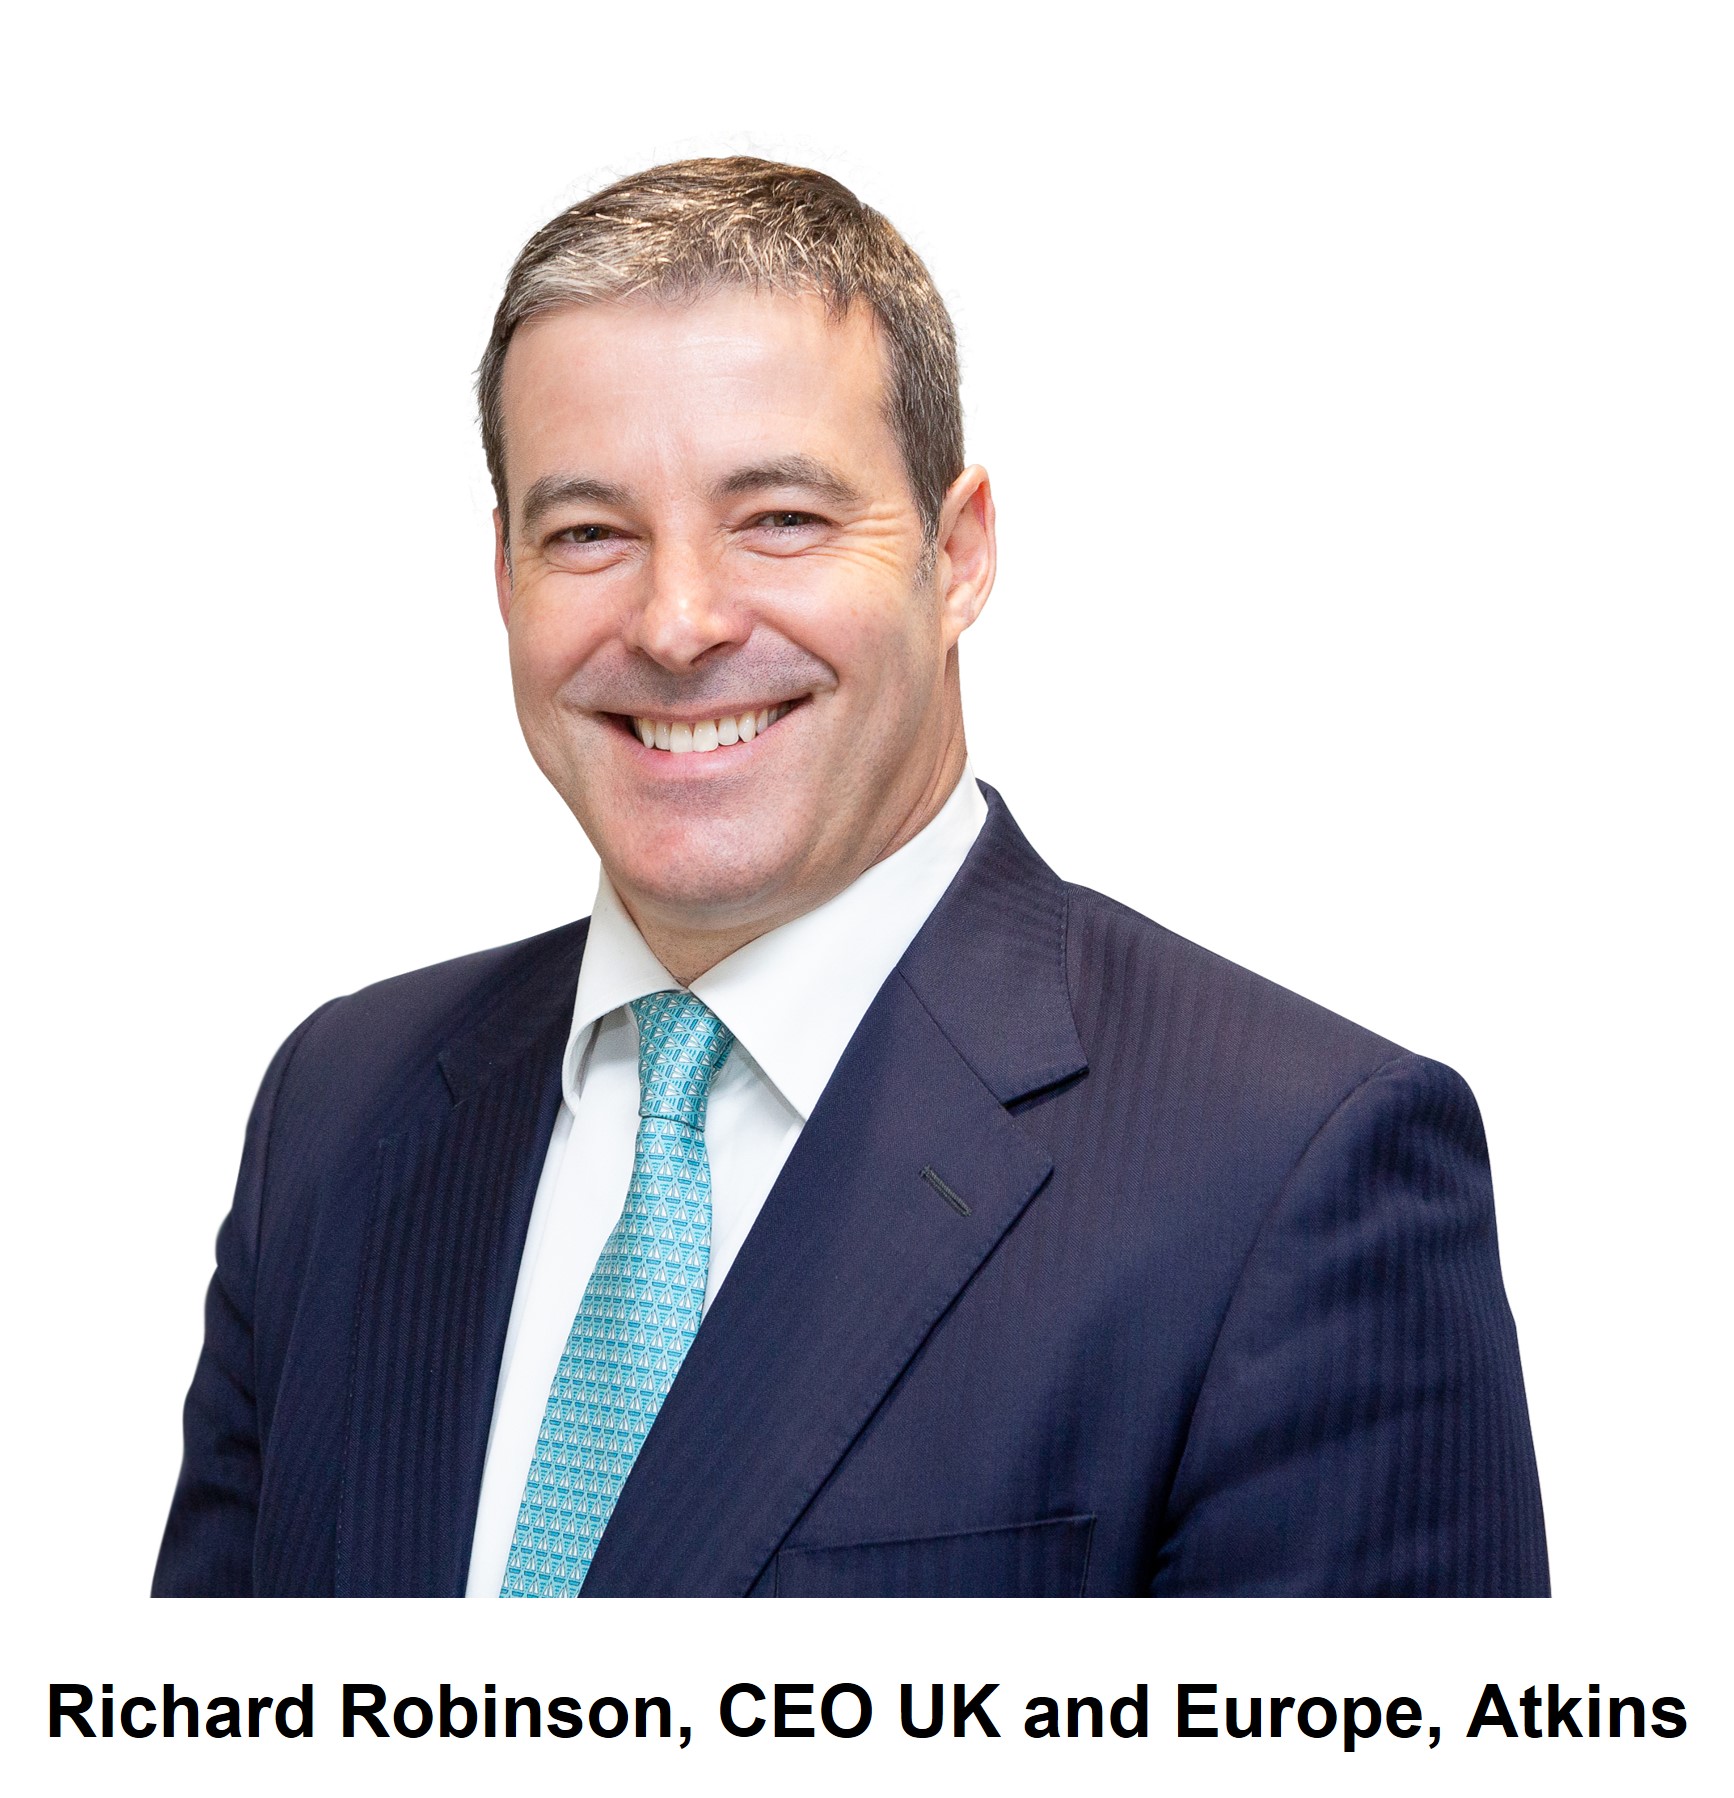 To show a picture of Richard Robinson, CEO UK and Europe, Atkins